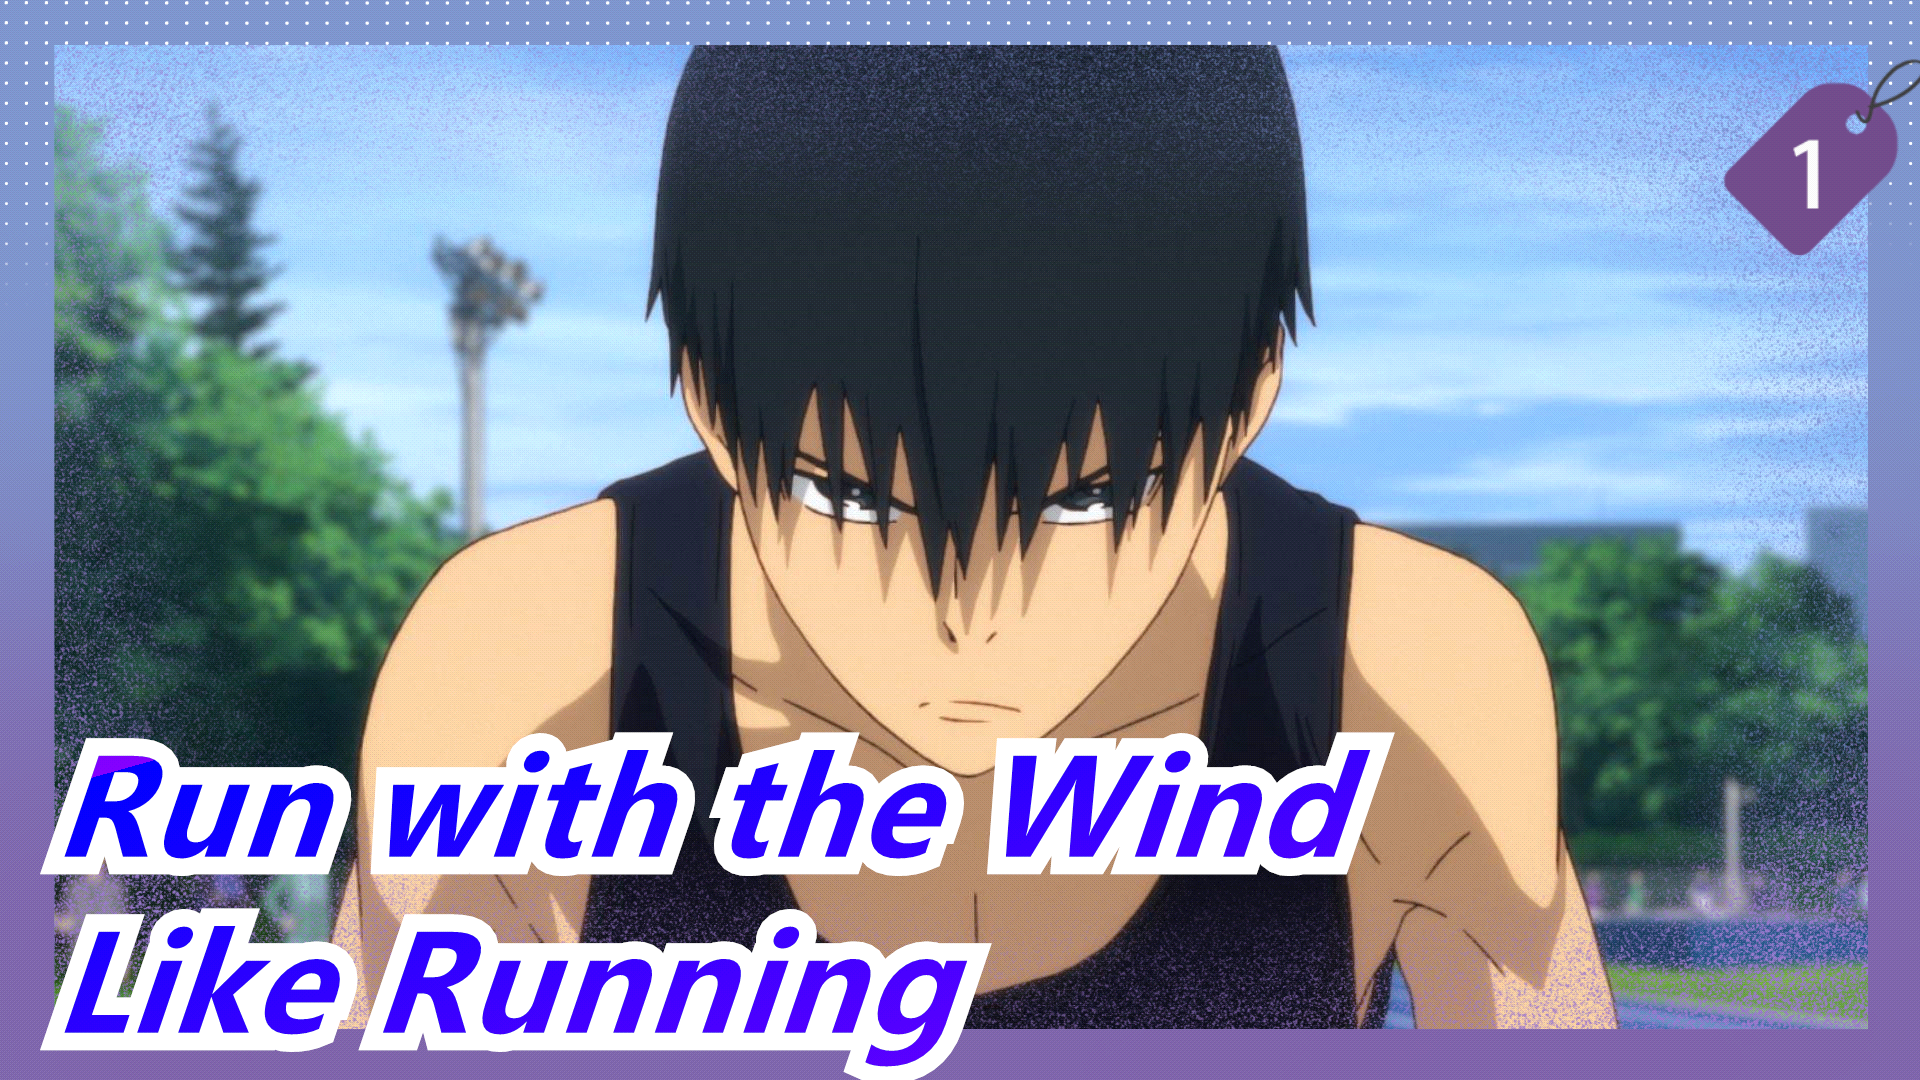 Run with the Wind Wholesome Heartfelt  Inspiring Every Step of the Race   Review  Takutos Anime Cafe